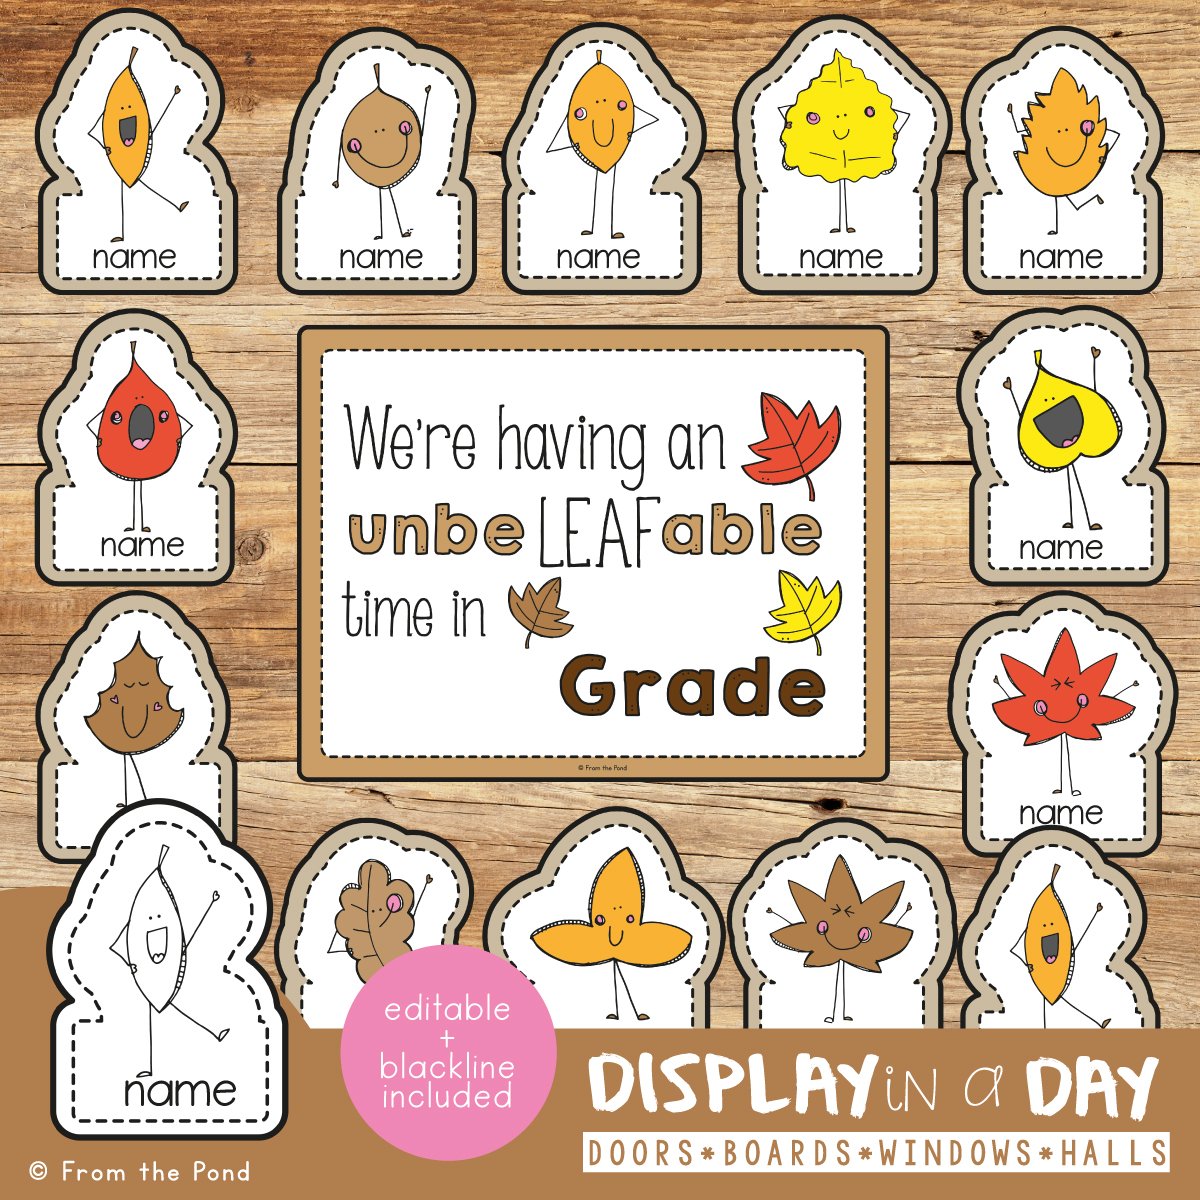 Unbe-LEAF-able